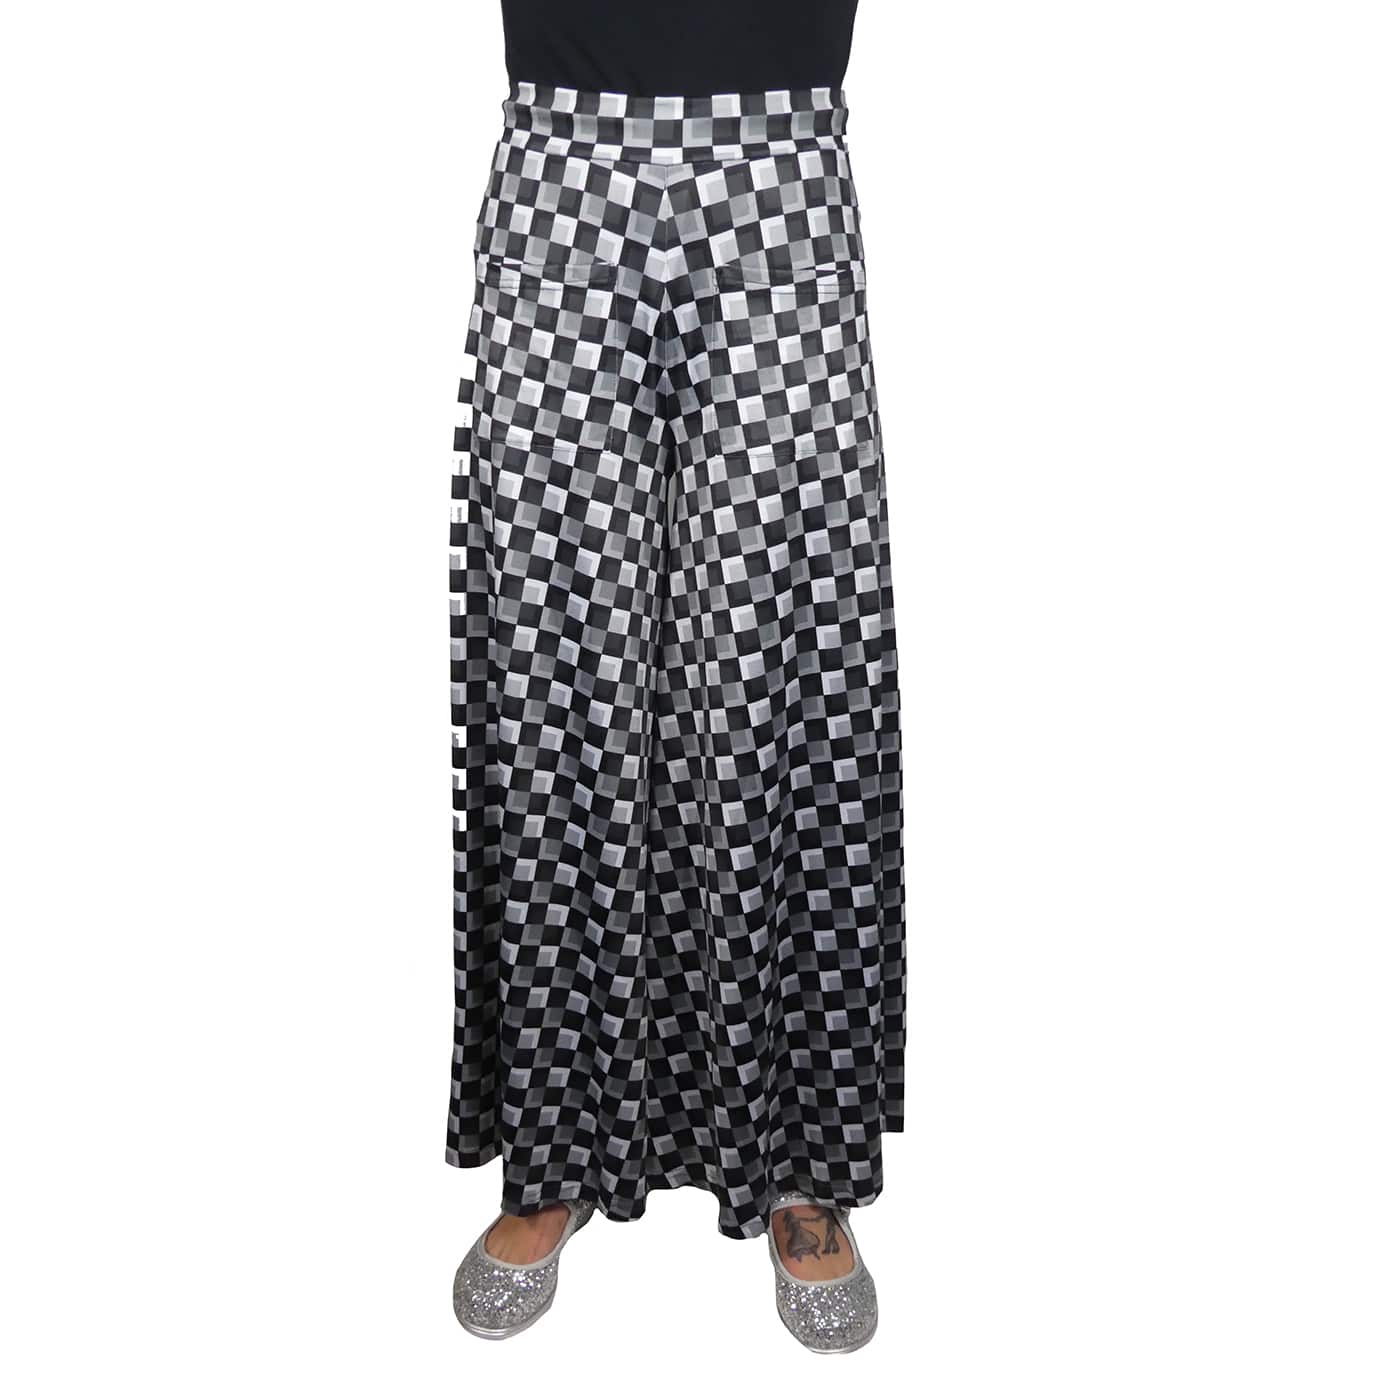 Too Square Wide Leg Pants by RainbowsAndFairies.com.au (Grey White Black Check - Monochrome - Pants With Pockets - Pallazo Pants - Flares - Kitsch) - SKU: CL_WIDEL_TOOSQ_ORG - Pic-01